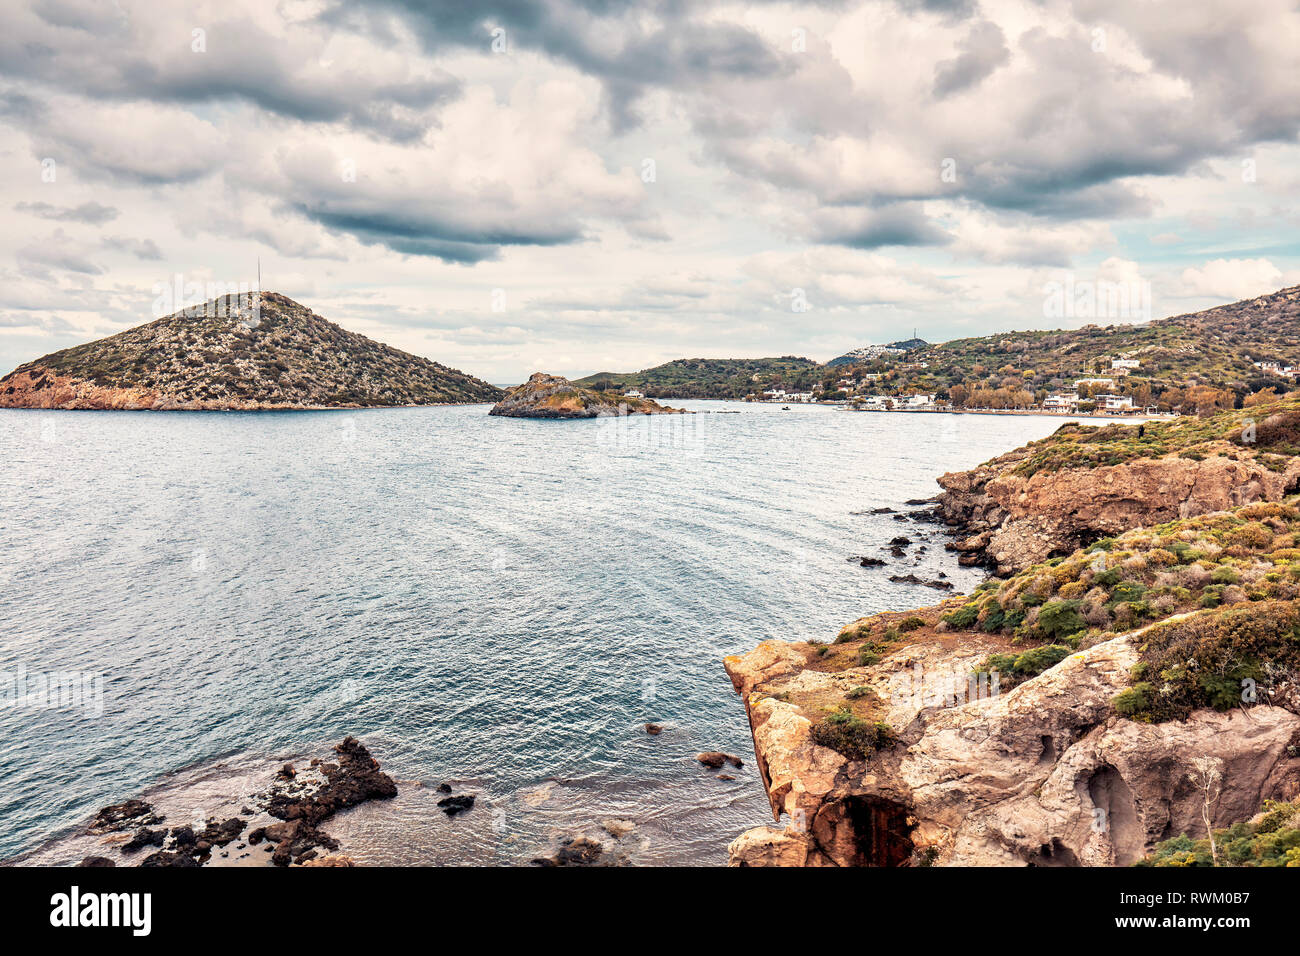 Moody view of Gumusluk bay in Bodrum, Mugla, Turkey on a cloudy winter day. Beautiful calm sea, meadow and sky landscape. Stock Photo